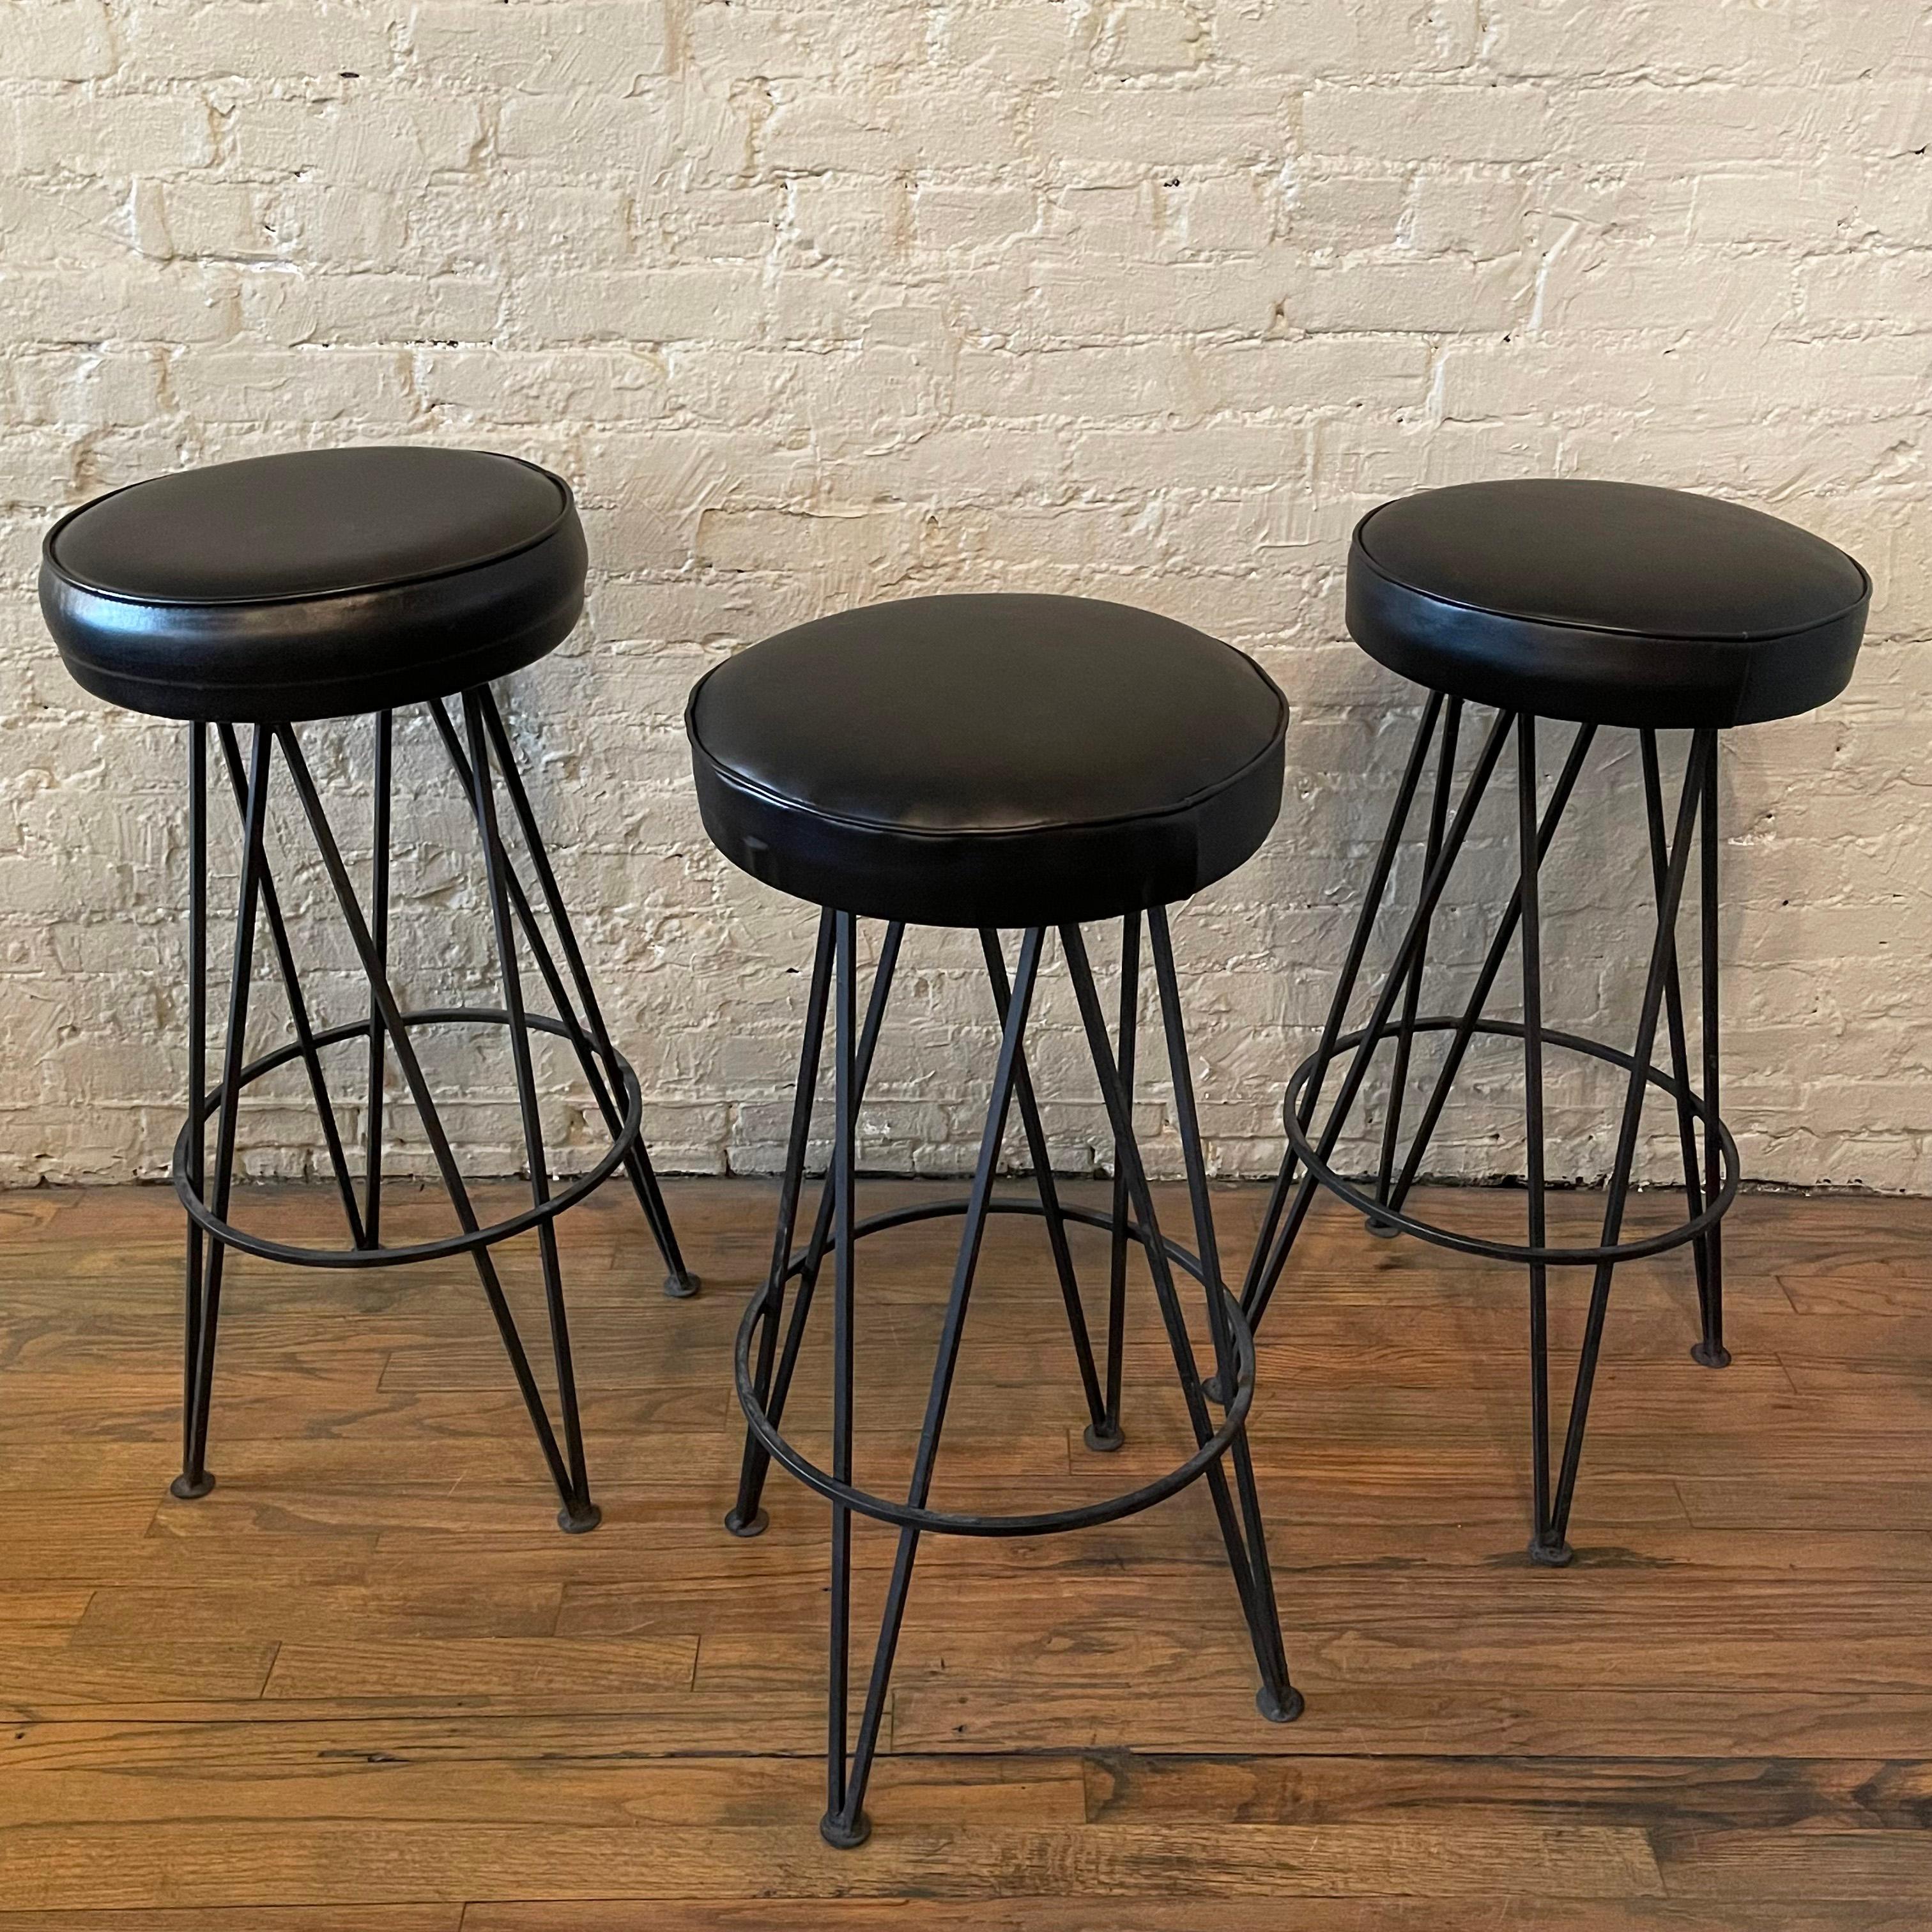 Set of three, classic, mid century modern bar stools feature wrought iron hairpin bases with 14 inch round black vinyl seats. The 14 inch diameter footrests are at 10 inches height. The seats do not swivel and one of the stools is slightly taller at